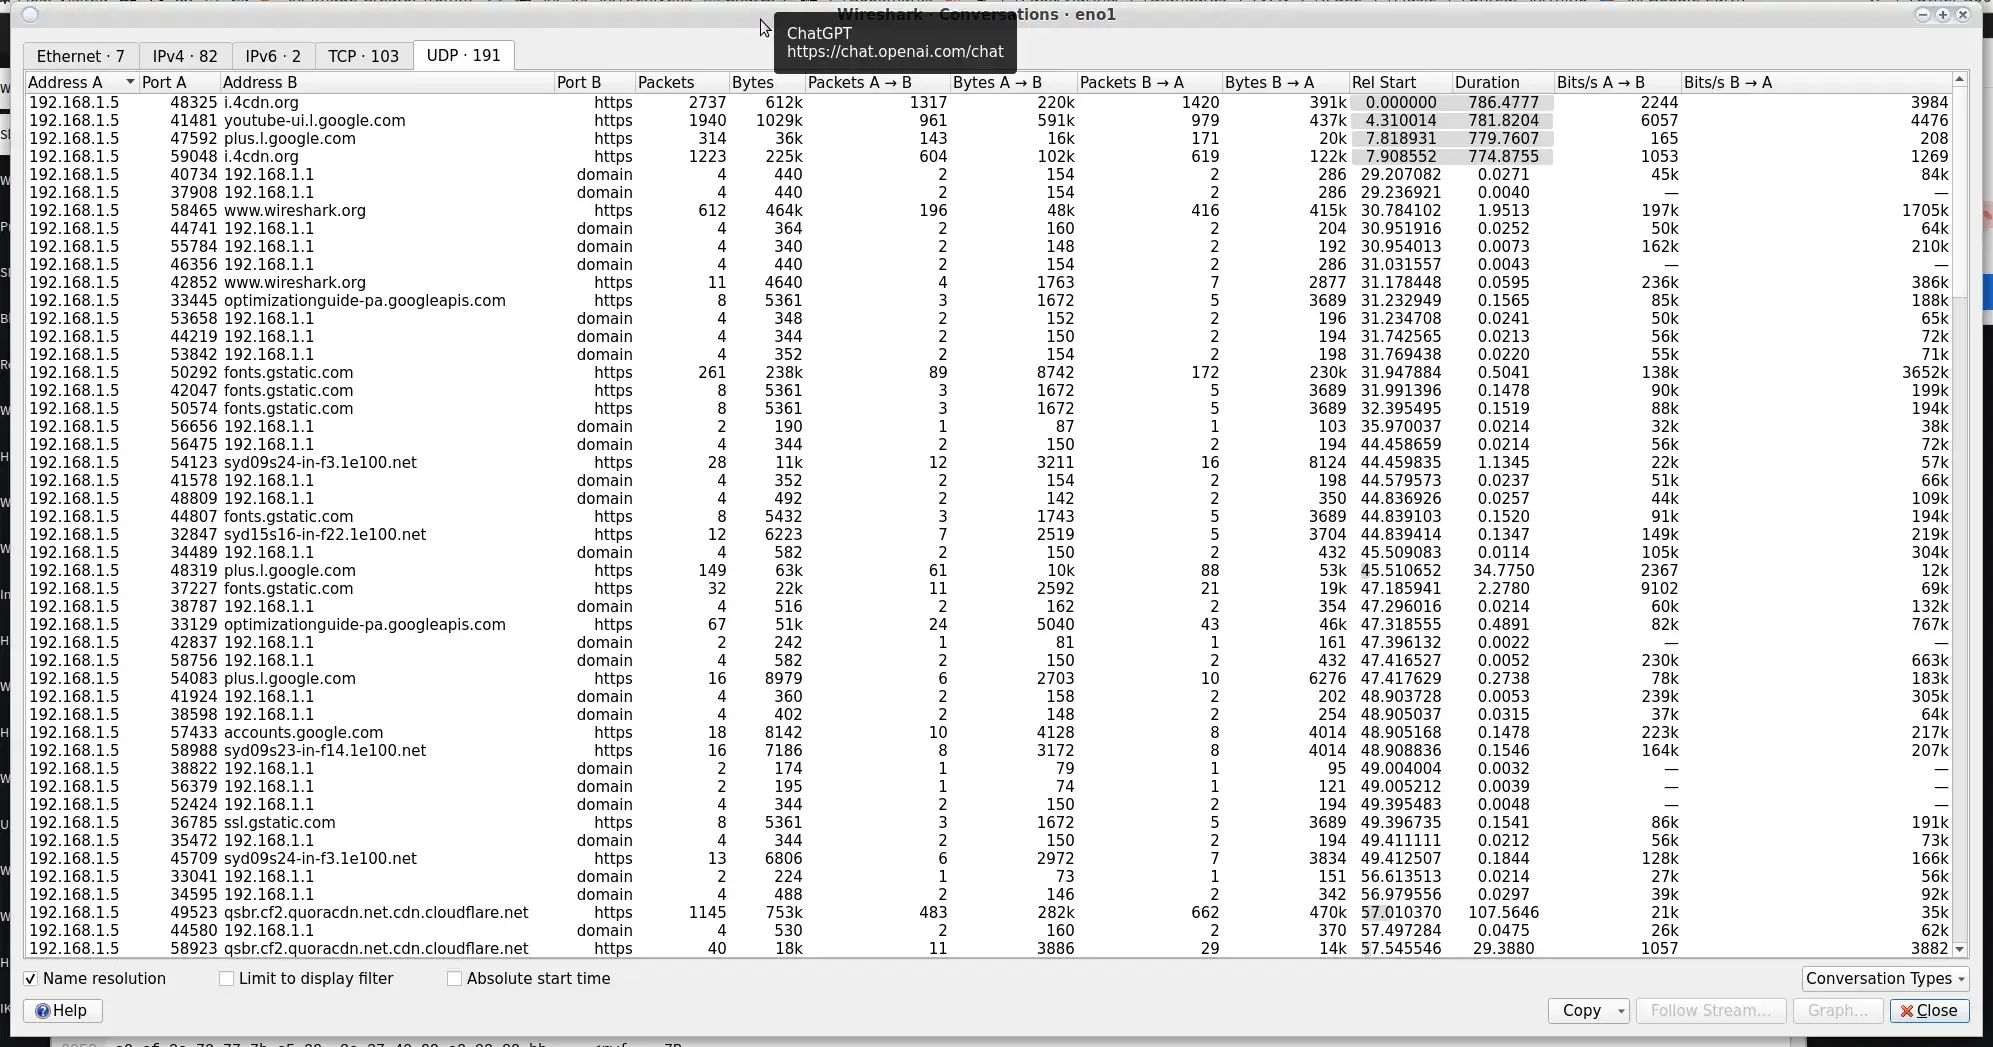 Viewing resolved nodenames in the Wireshark statistics dialog.